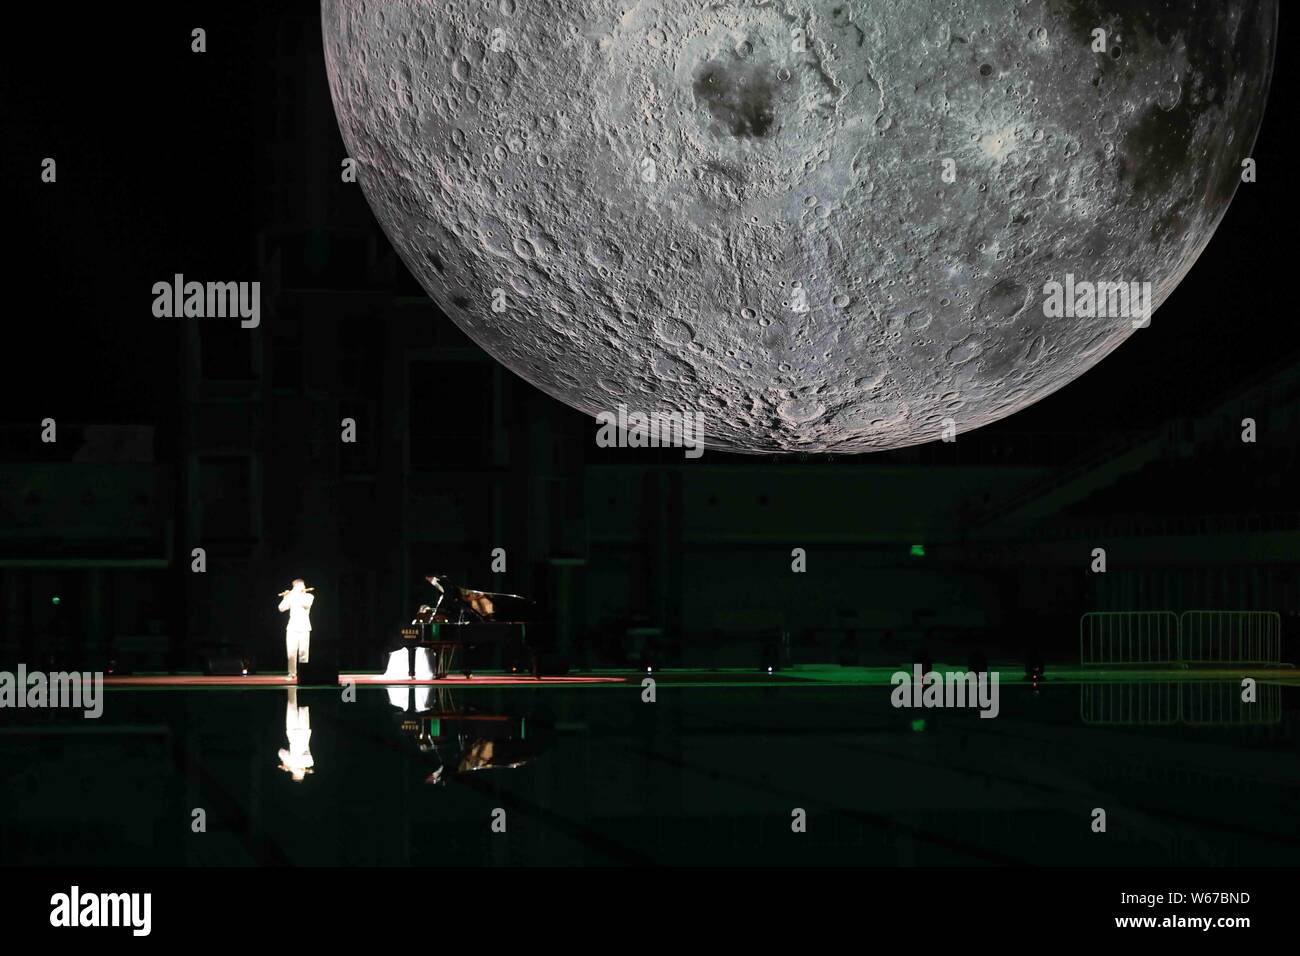 Visitors view a huge moon model during an exhibition on moon held at the National Aquatic Center or "Water Cube" in Beijing, China, 8 July 2018.    A Stock Photo